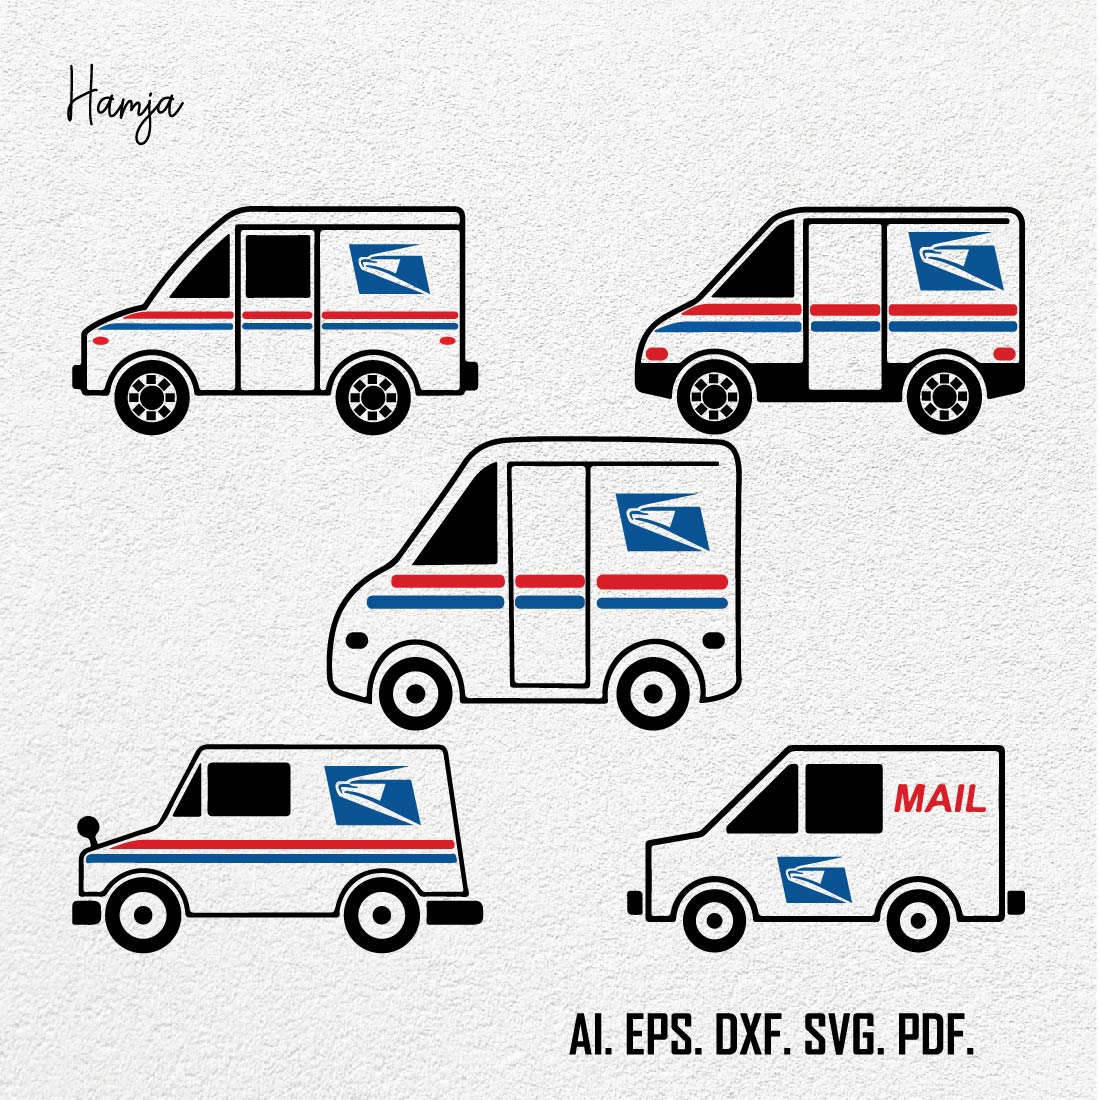 Mail Truck SVG File, Postal Truck SVG, Post Office Clip Art, Delivery Truck svg, Cut files for Cricut, Cameo, Silhouette, Cut File preview image.